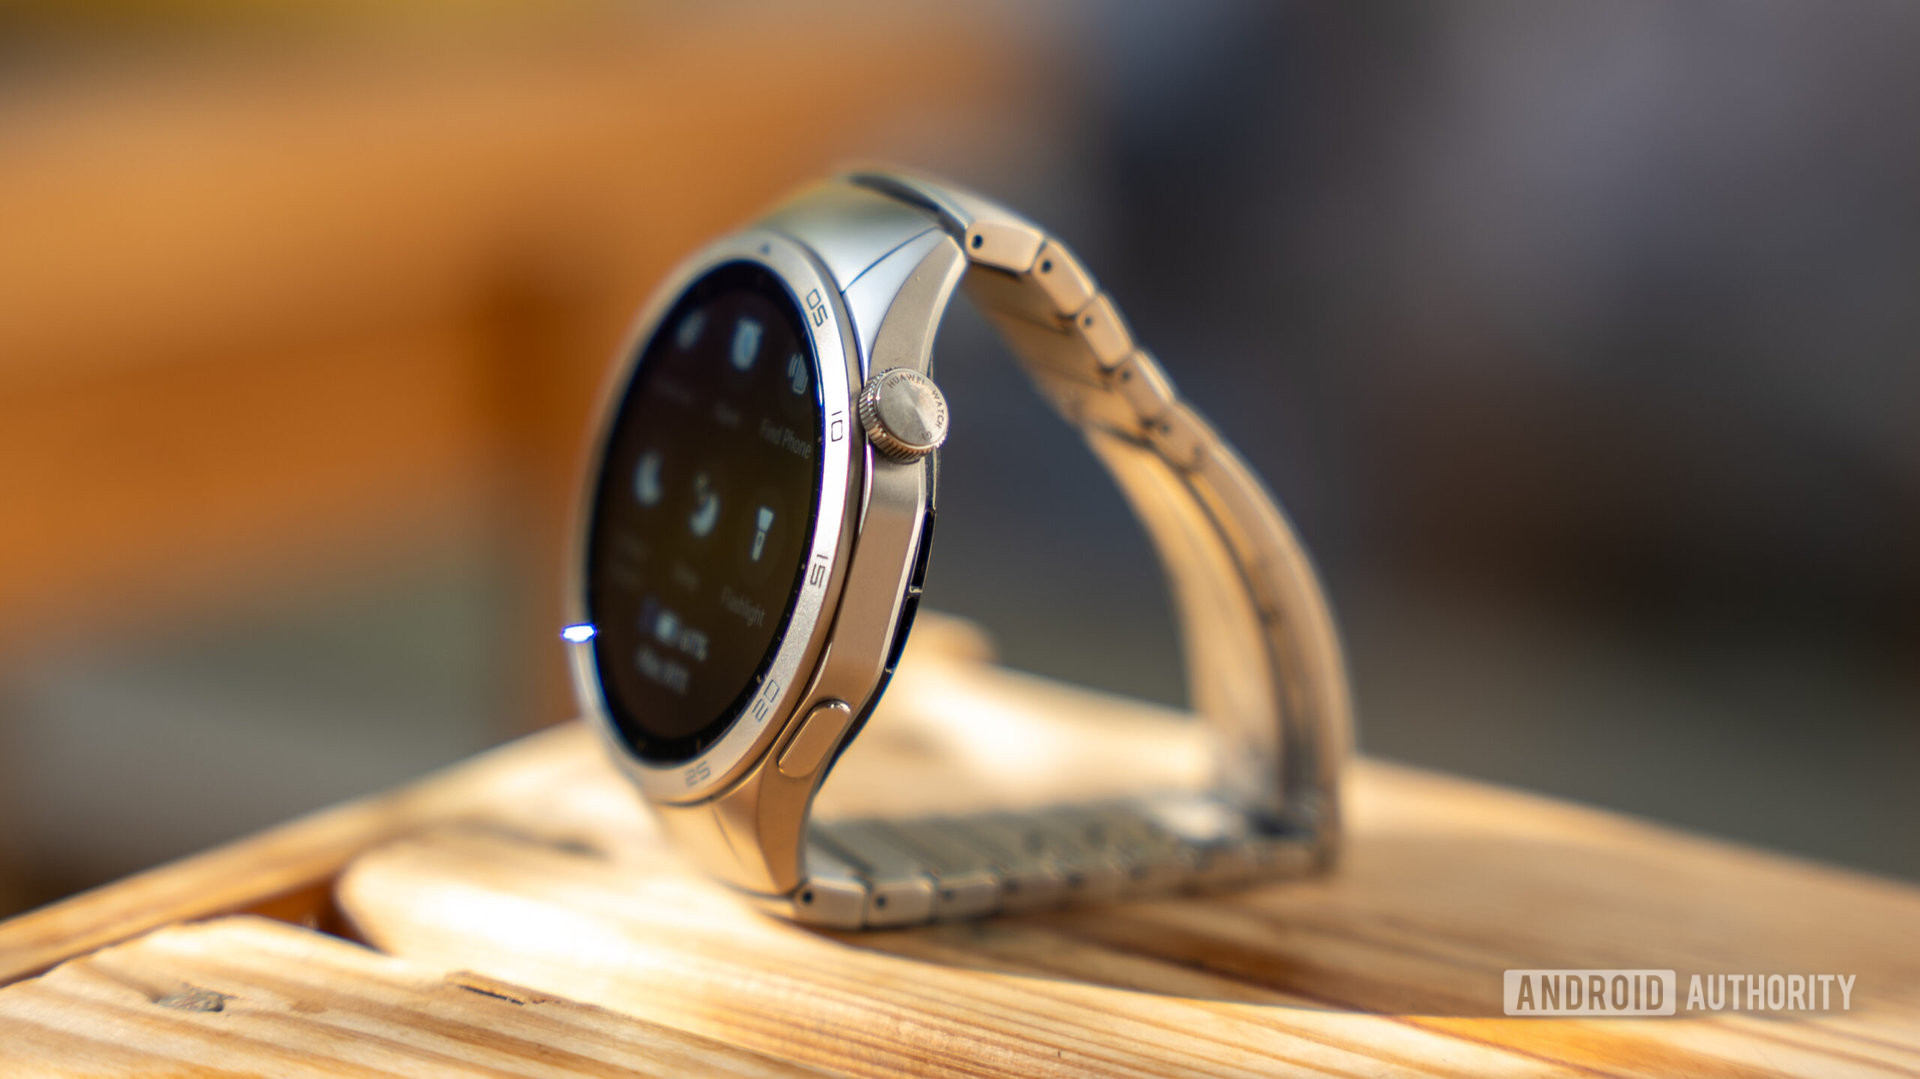 Huawei Watch GT 4 smartwatch on a table showing button, crown, and integrated bracelet design